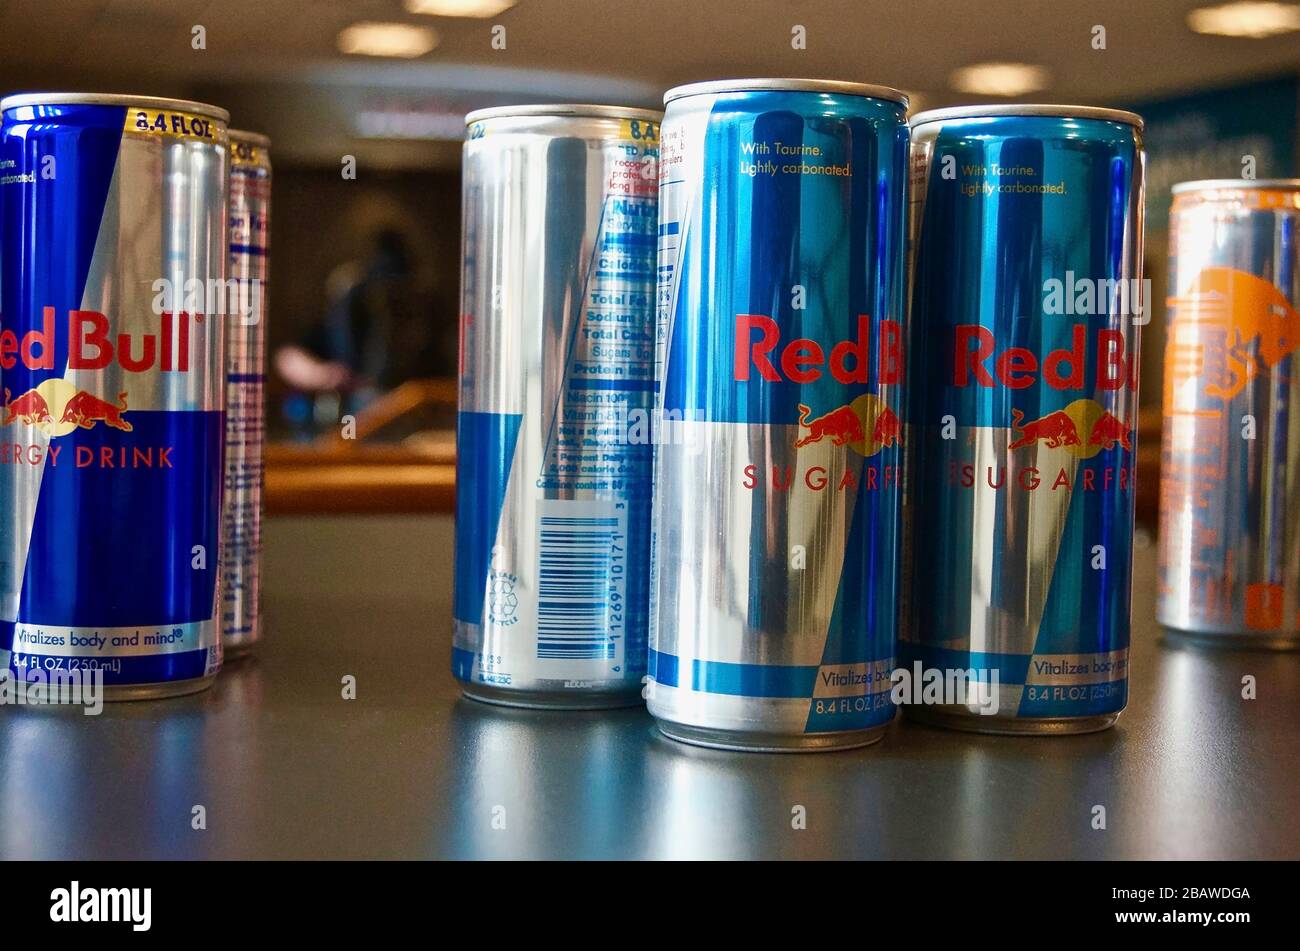 Red bull sponsorship at a film educational event in Minnesota for high school students and future film makers Stock Photo